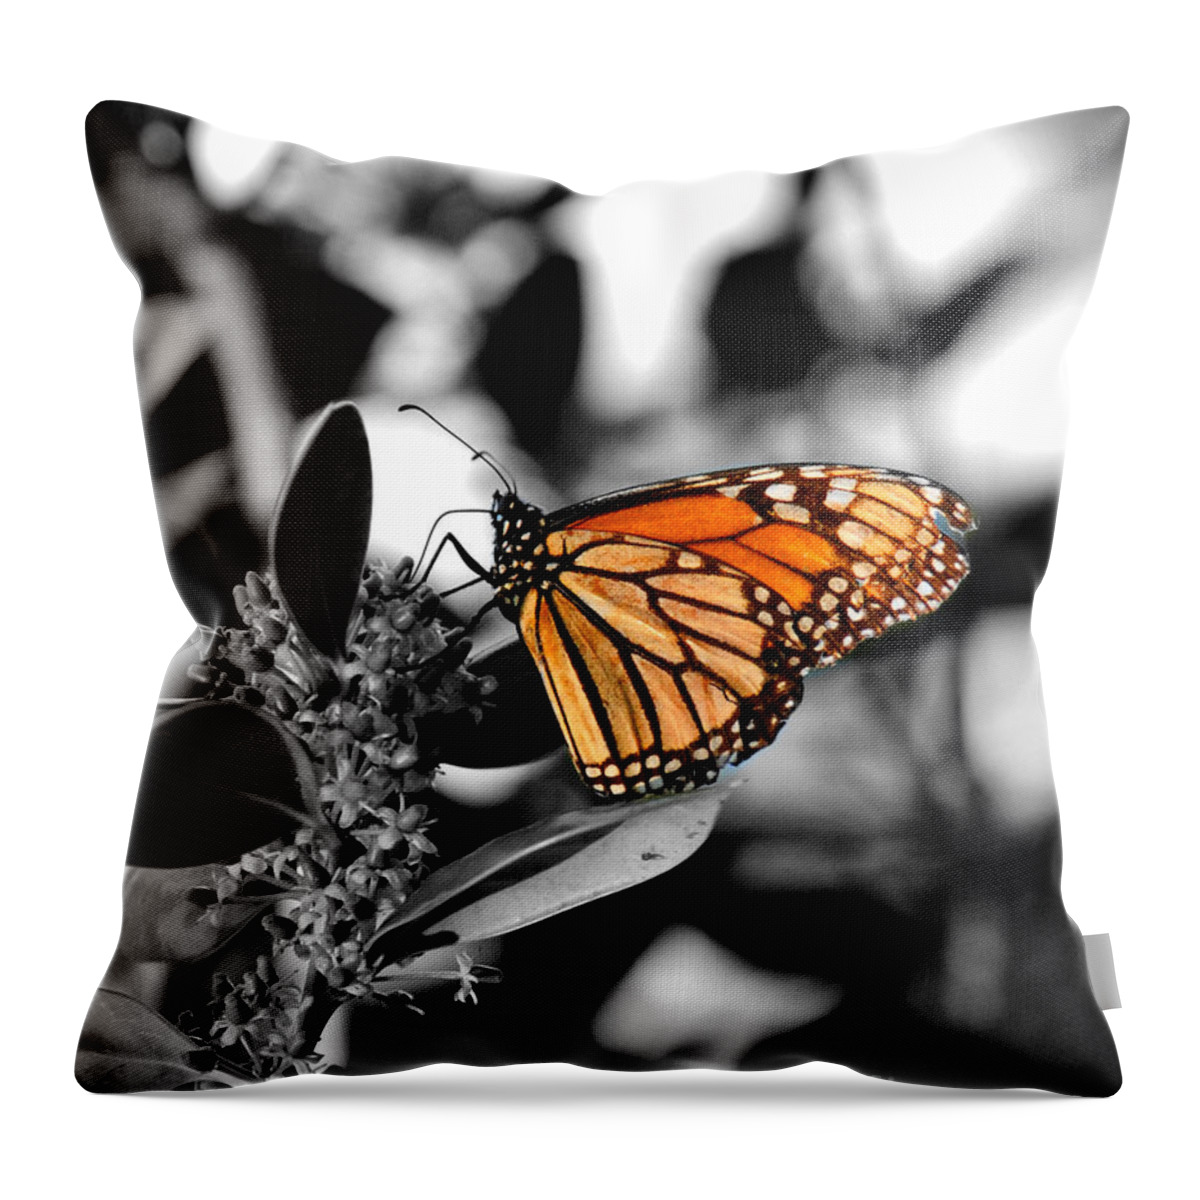 Monarch Throw Pillow featuring the photograph The Monarch by Jai Johnson